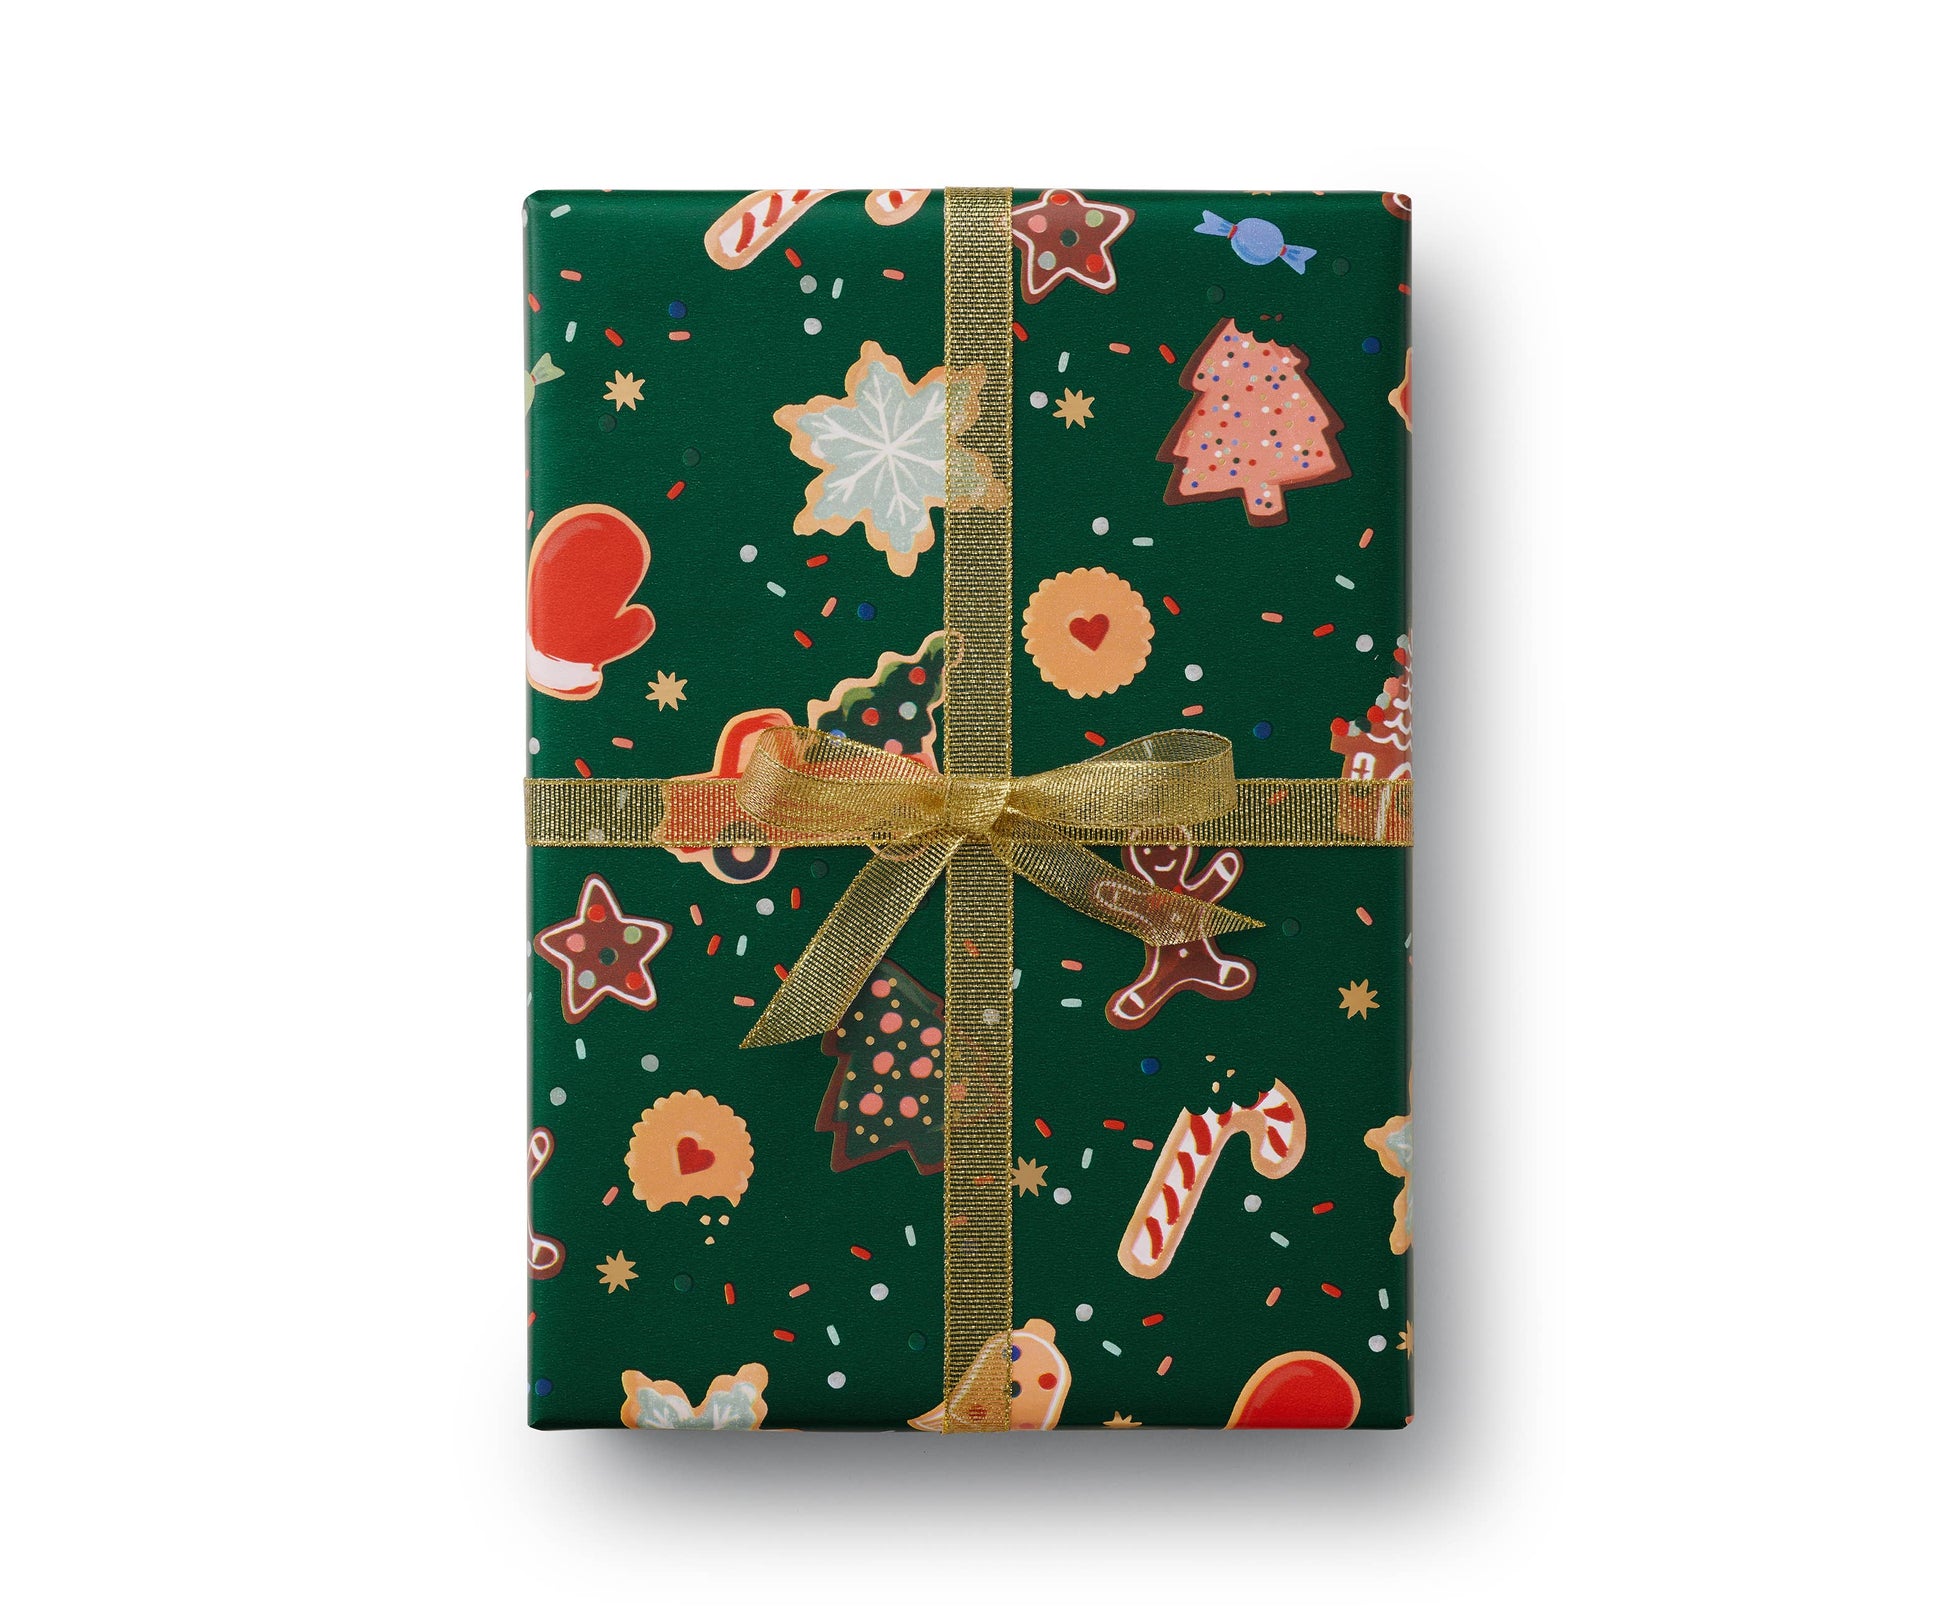 Gift wrapping paper with illustration of Christmas cookies in assorted shapes (gingerbread people, candycanes, etc) on green background. Shown with sparkley gold ribbon.